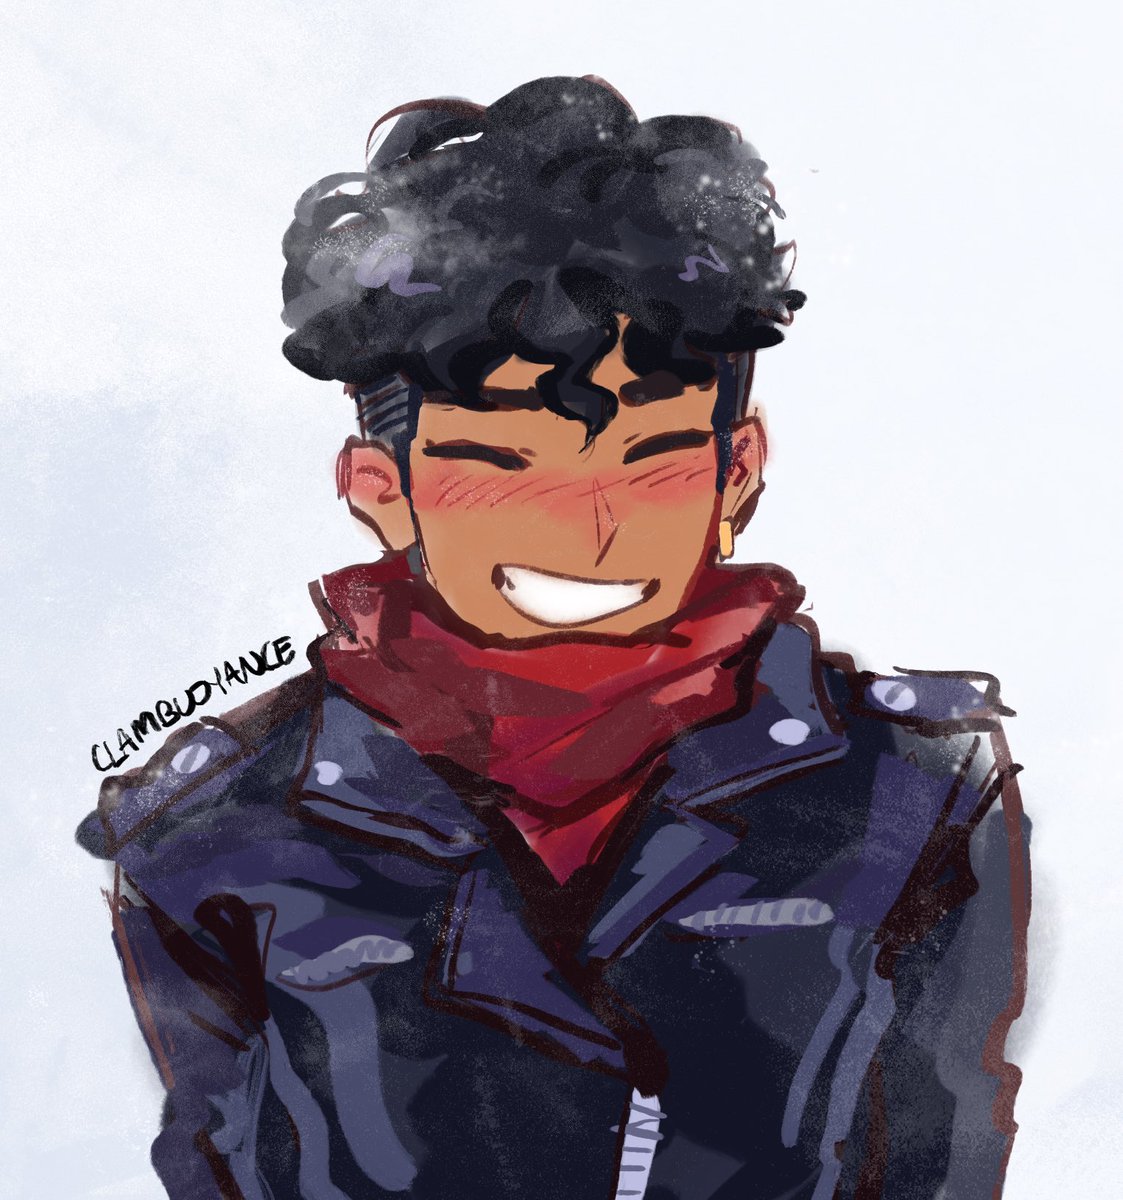 [DC] happy holidays!! ❄️ 🎁 

will post something later but have a messy drawing for now
#konel #connerkent #superboy